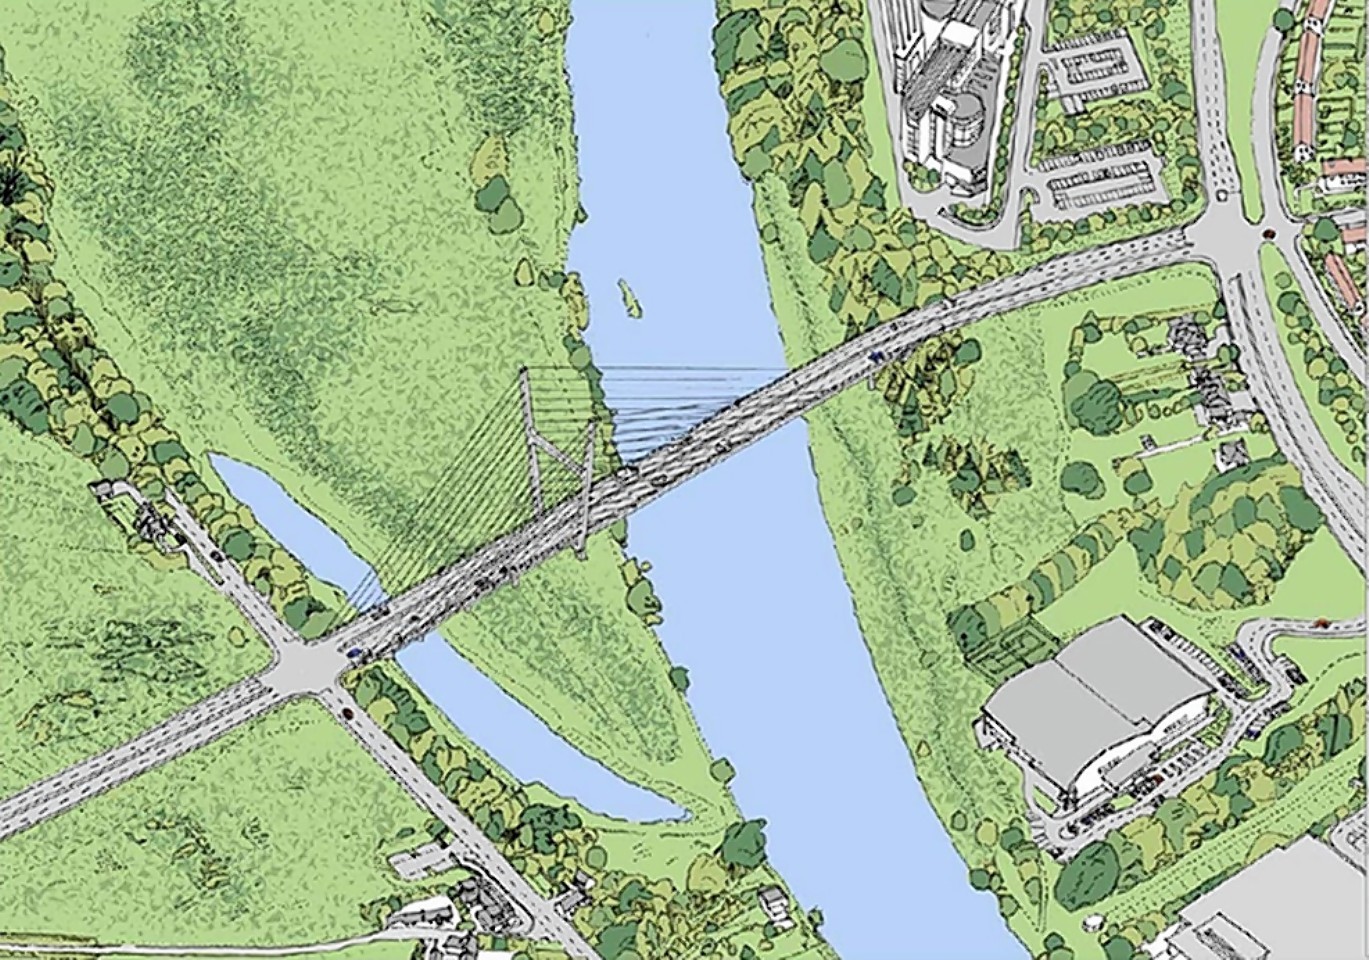 Should the new bridge look like this? 